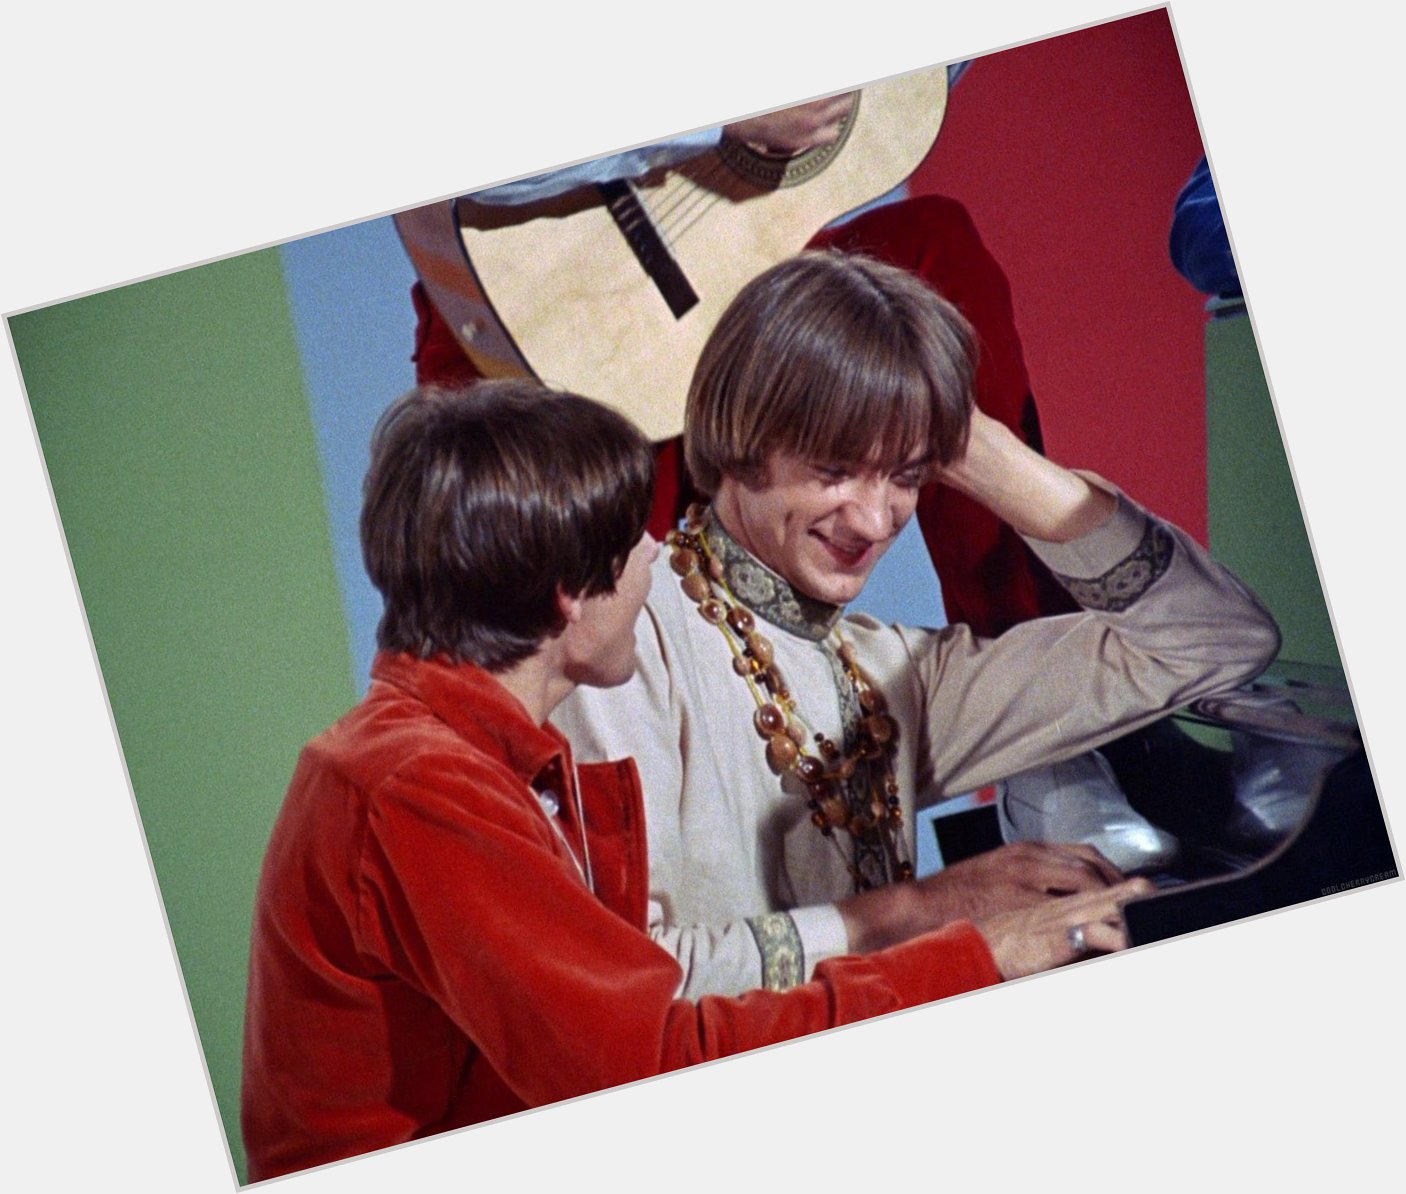 Happy heavenly 80th birthday to sunshine in human form, peter tork. i love and miss you     